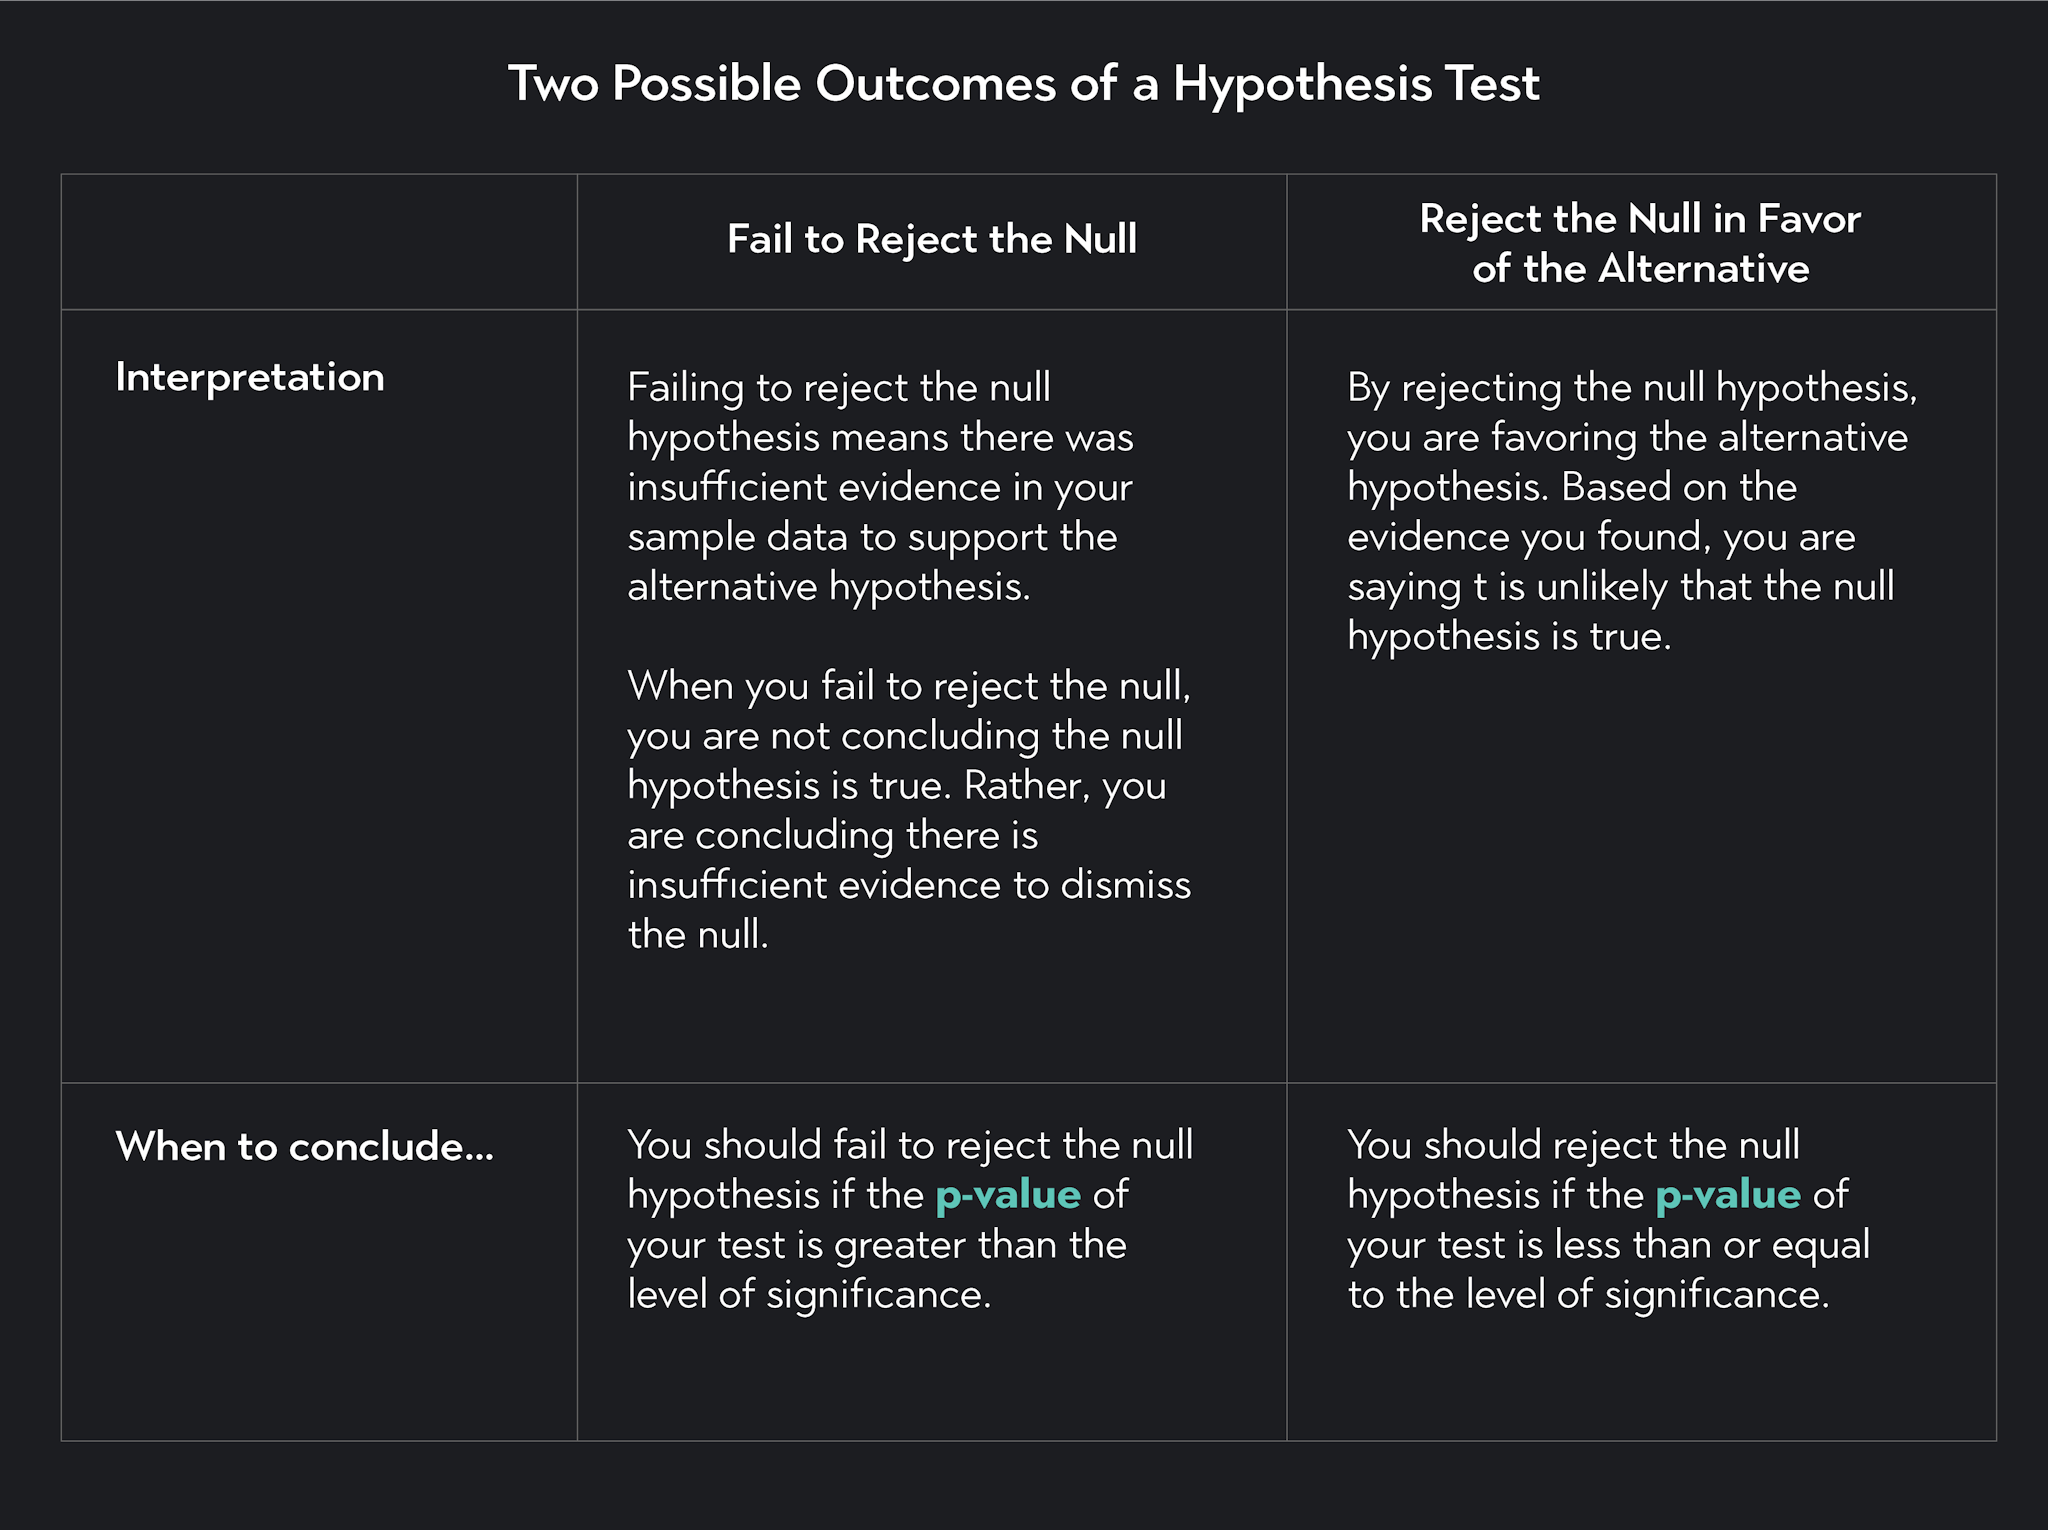 Chart going over 2 possible outcomes of a hypothesis test